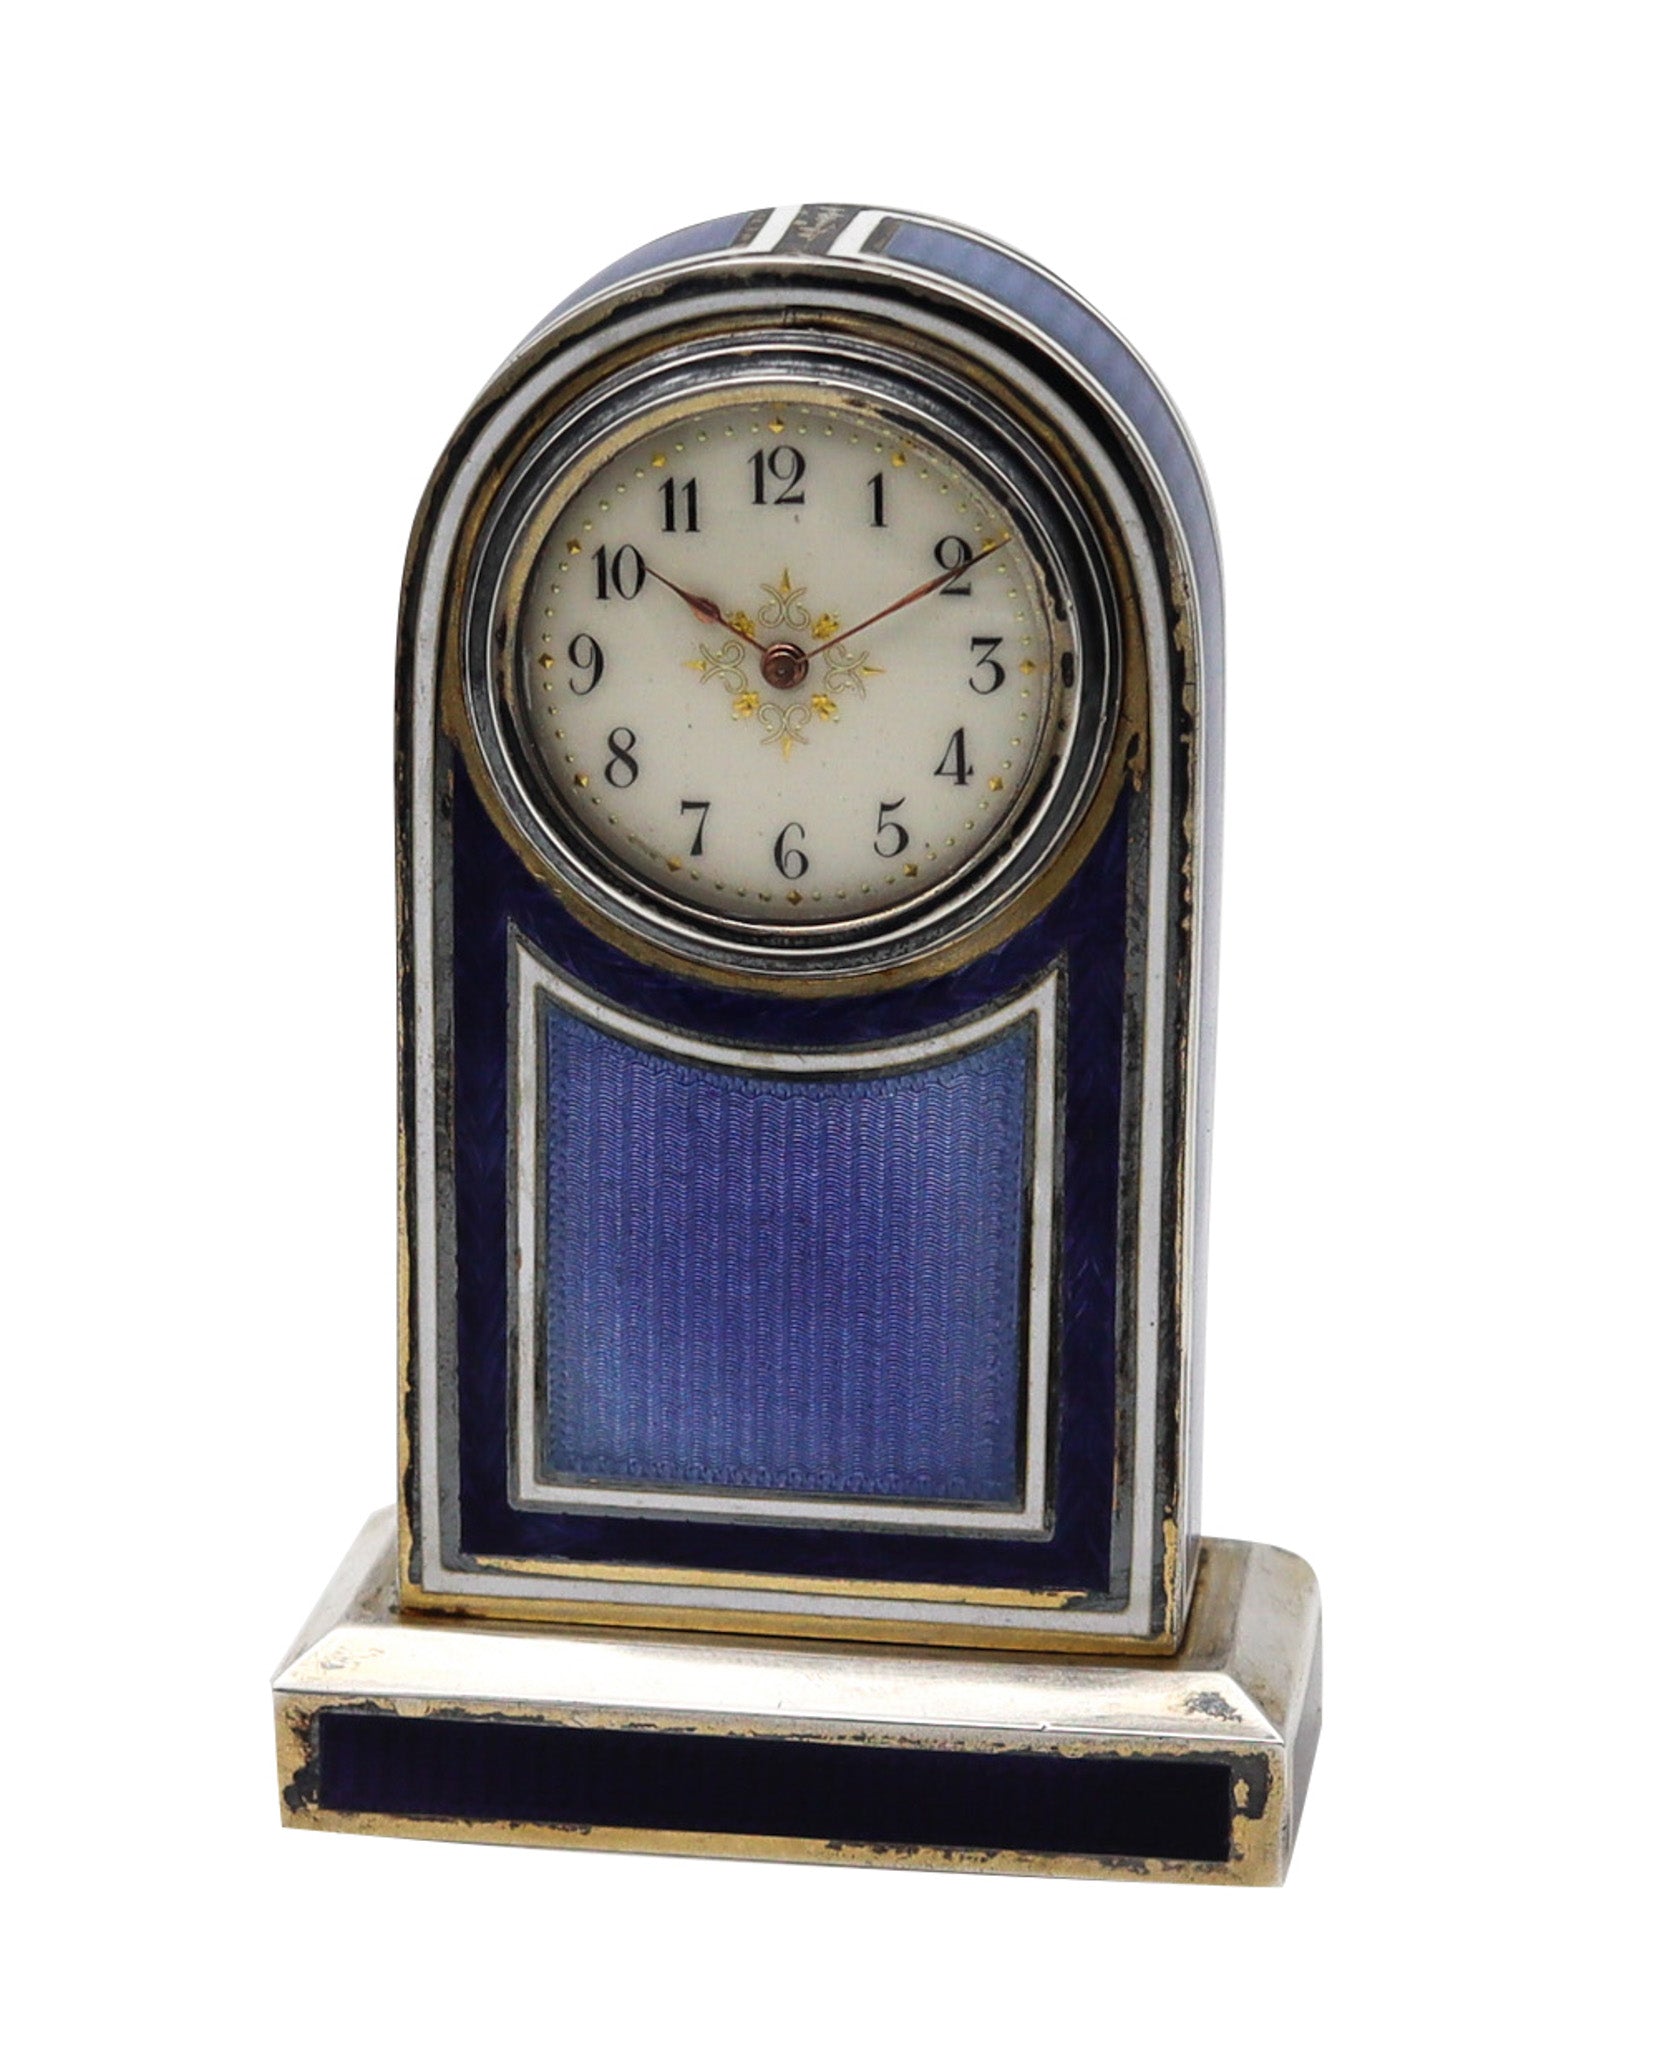 Cigarette Box with Clock - Mechanical Clock - Year 1960